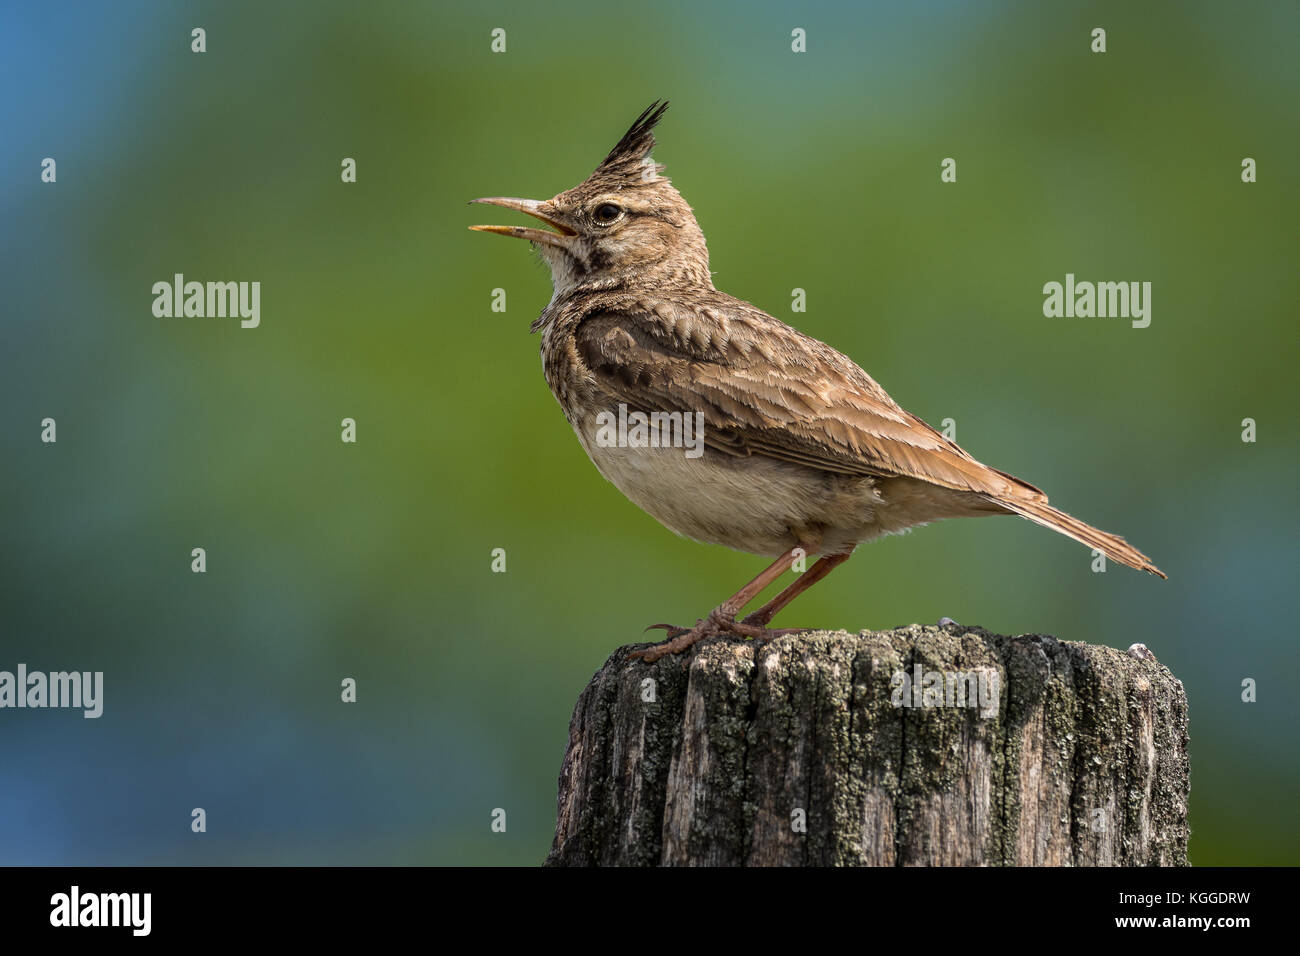 Crested Lark (Galerida cristata) perched on a stake with green and blue background. Stock Photo